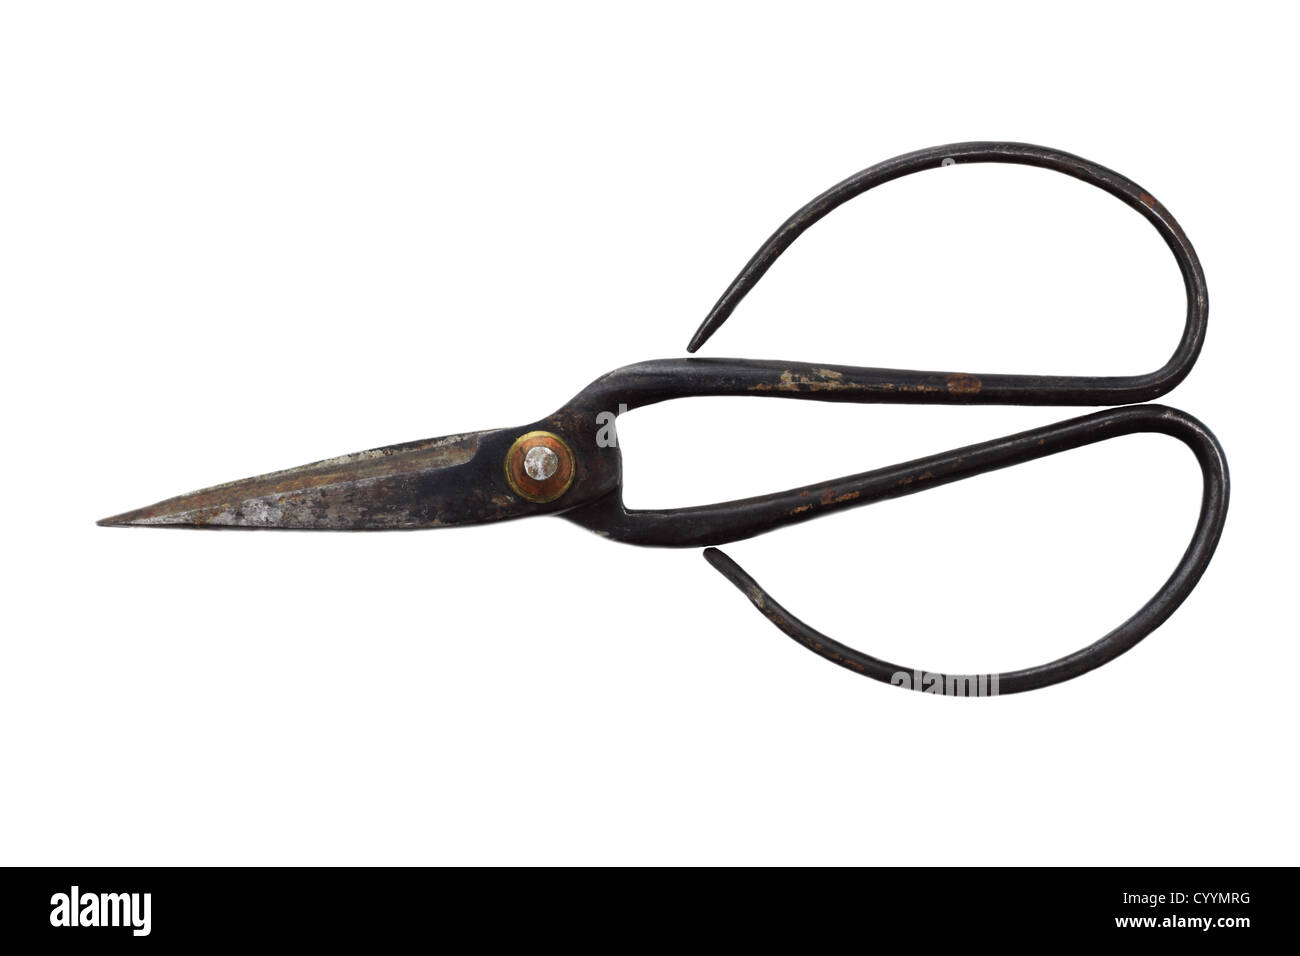 Traditional style antique metal Japanese Bonsai shears/scissors isolated on a white background. Stock Photo